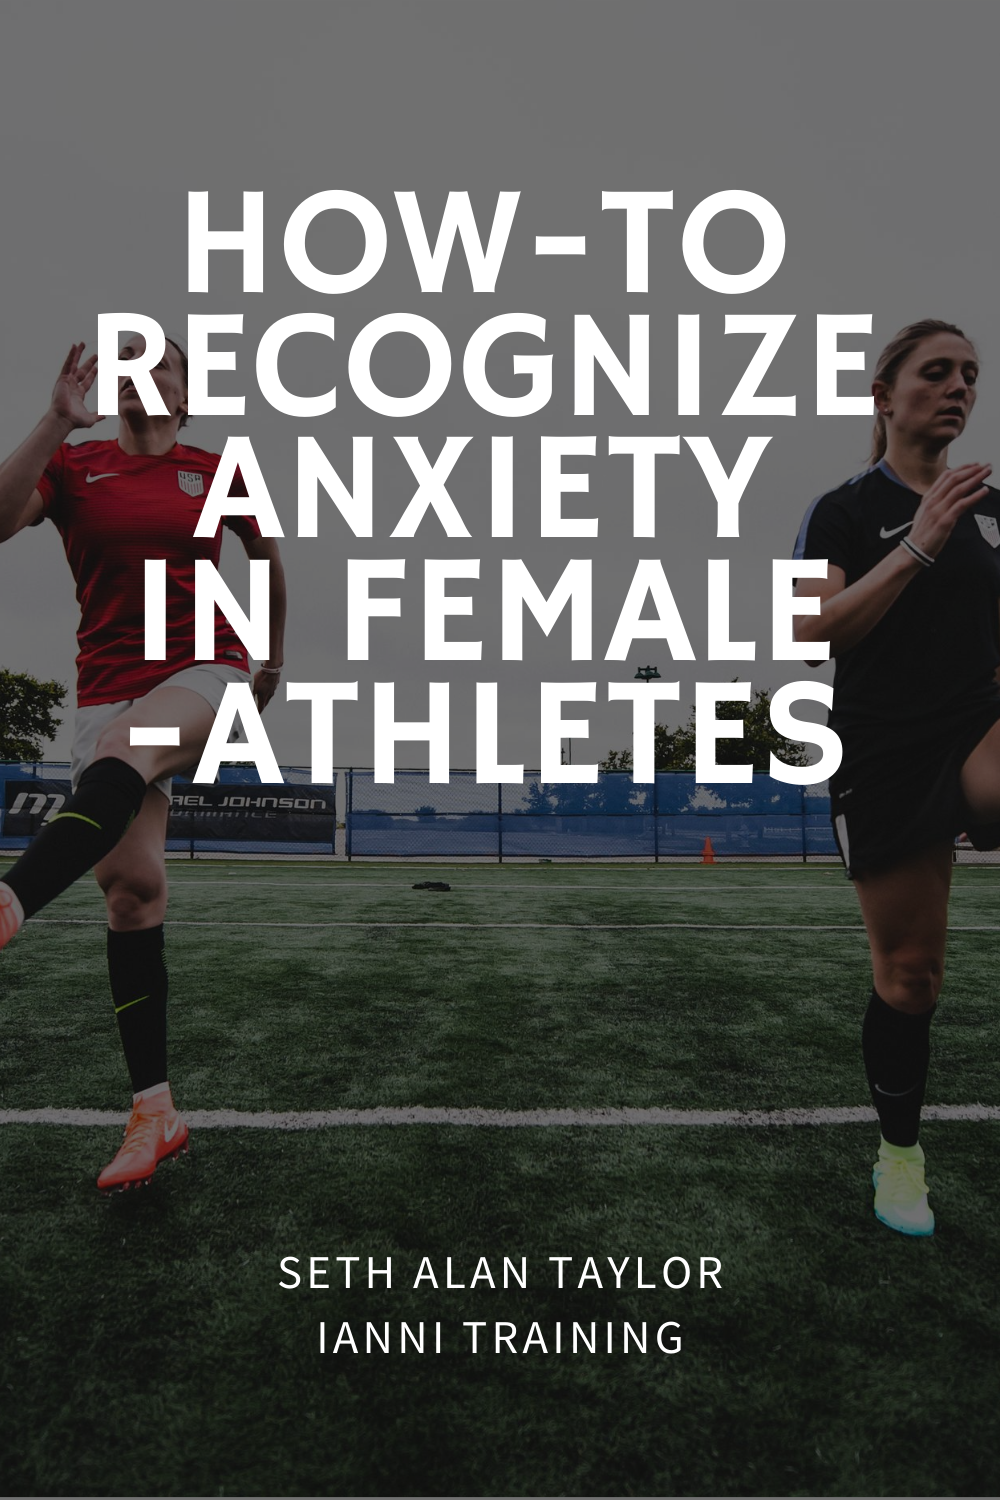 How-to Know If You Have Anxiety for Female-Athletes by Ianni Training